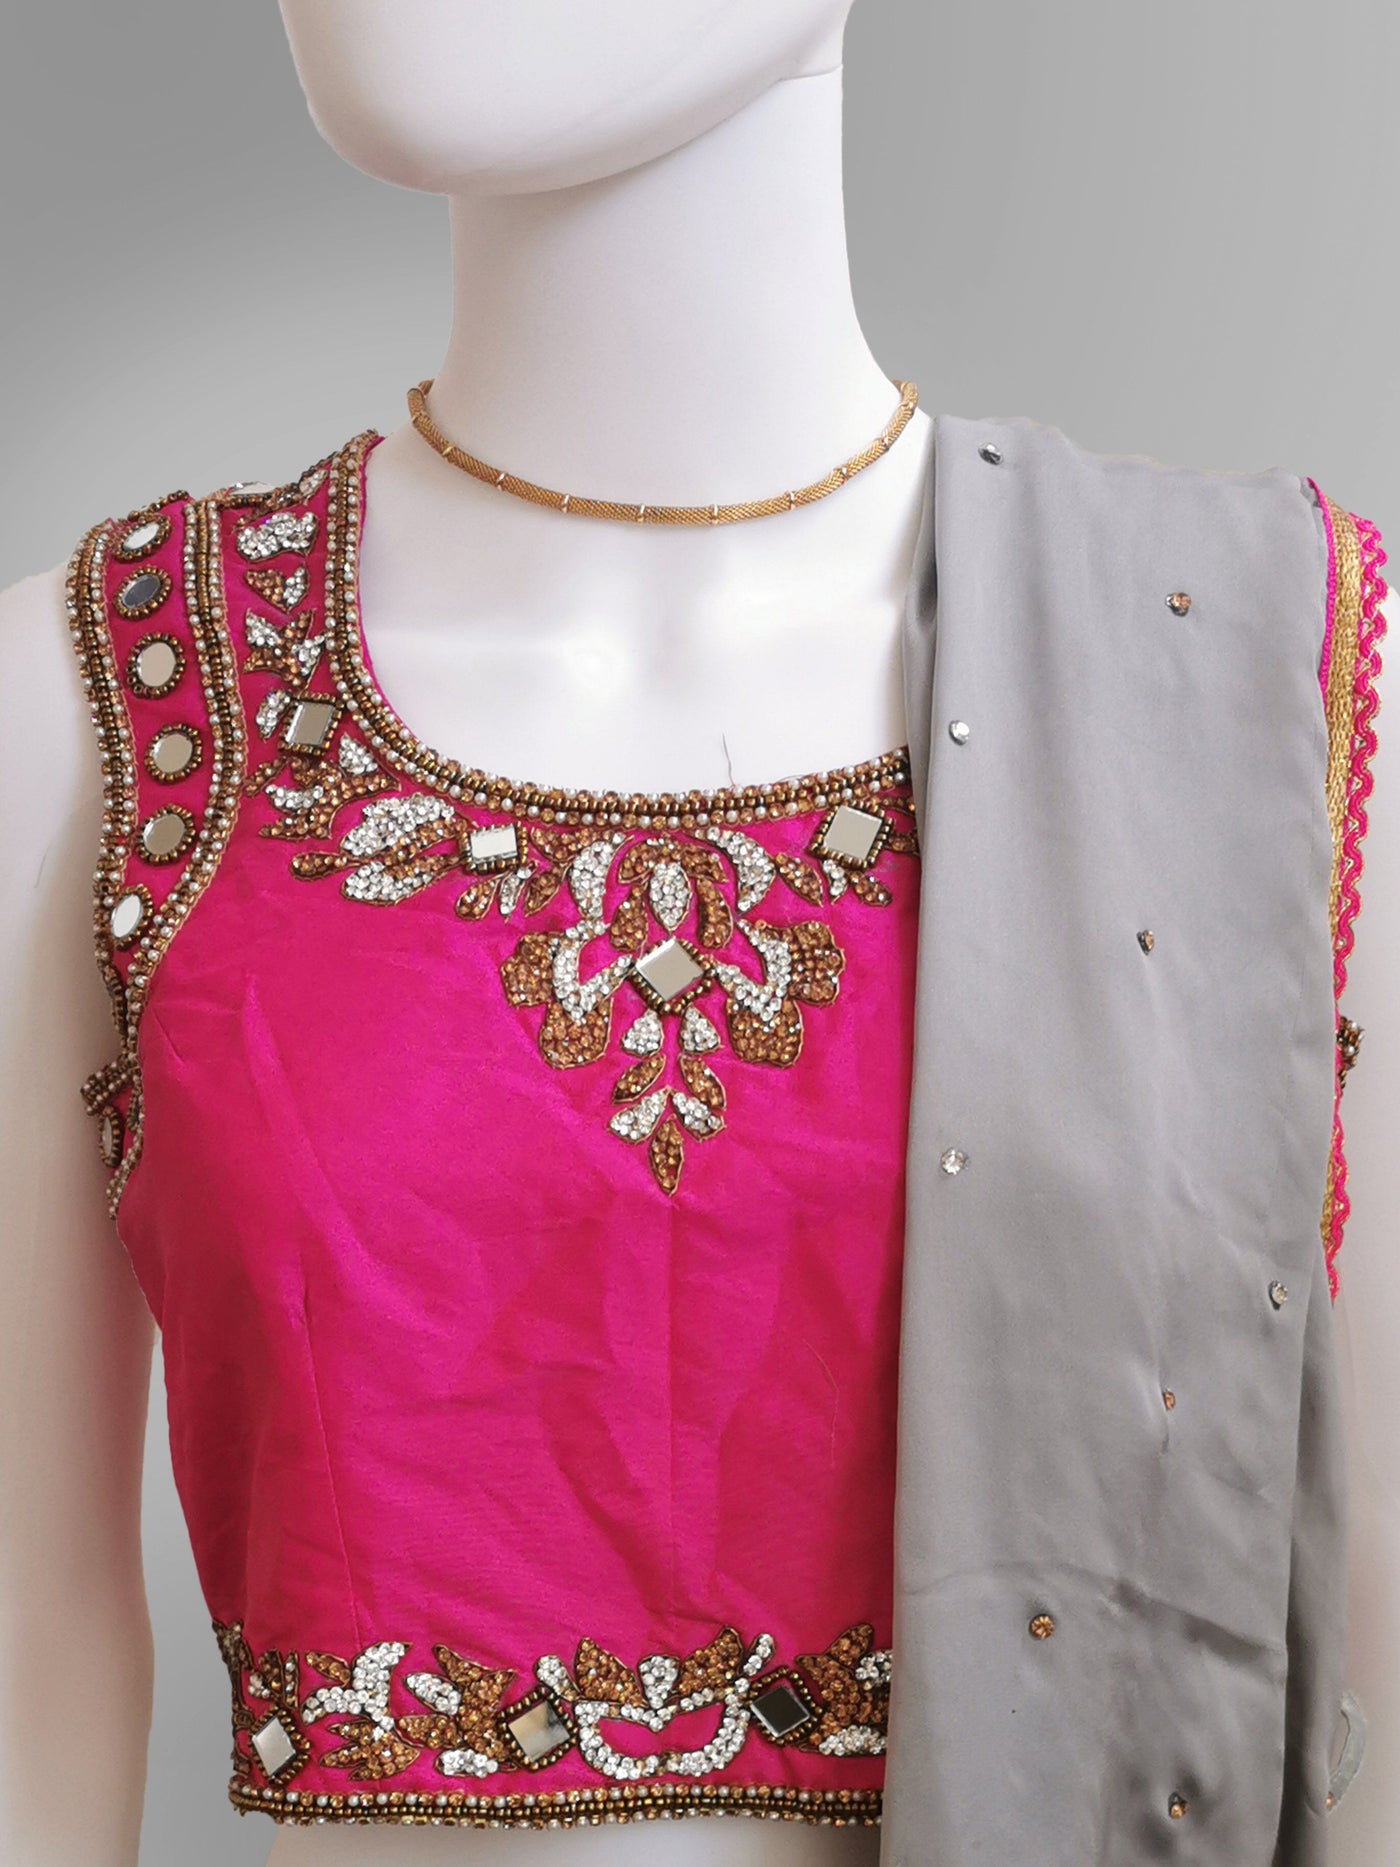 Lehenga in Light Gray and Pink - Indian Clothing in Denver, CO, Aurora, CO, Boulder, CO, Fort Collins, CO, Colorado Springs, CO, Parker, CO, Highlands Ranch, CO, Cherry Creek, CO, Centennial, CO, and Longmont, CO. Nationwide shipping USA - India Fashion X